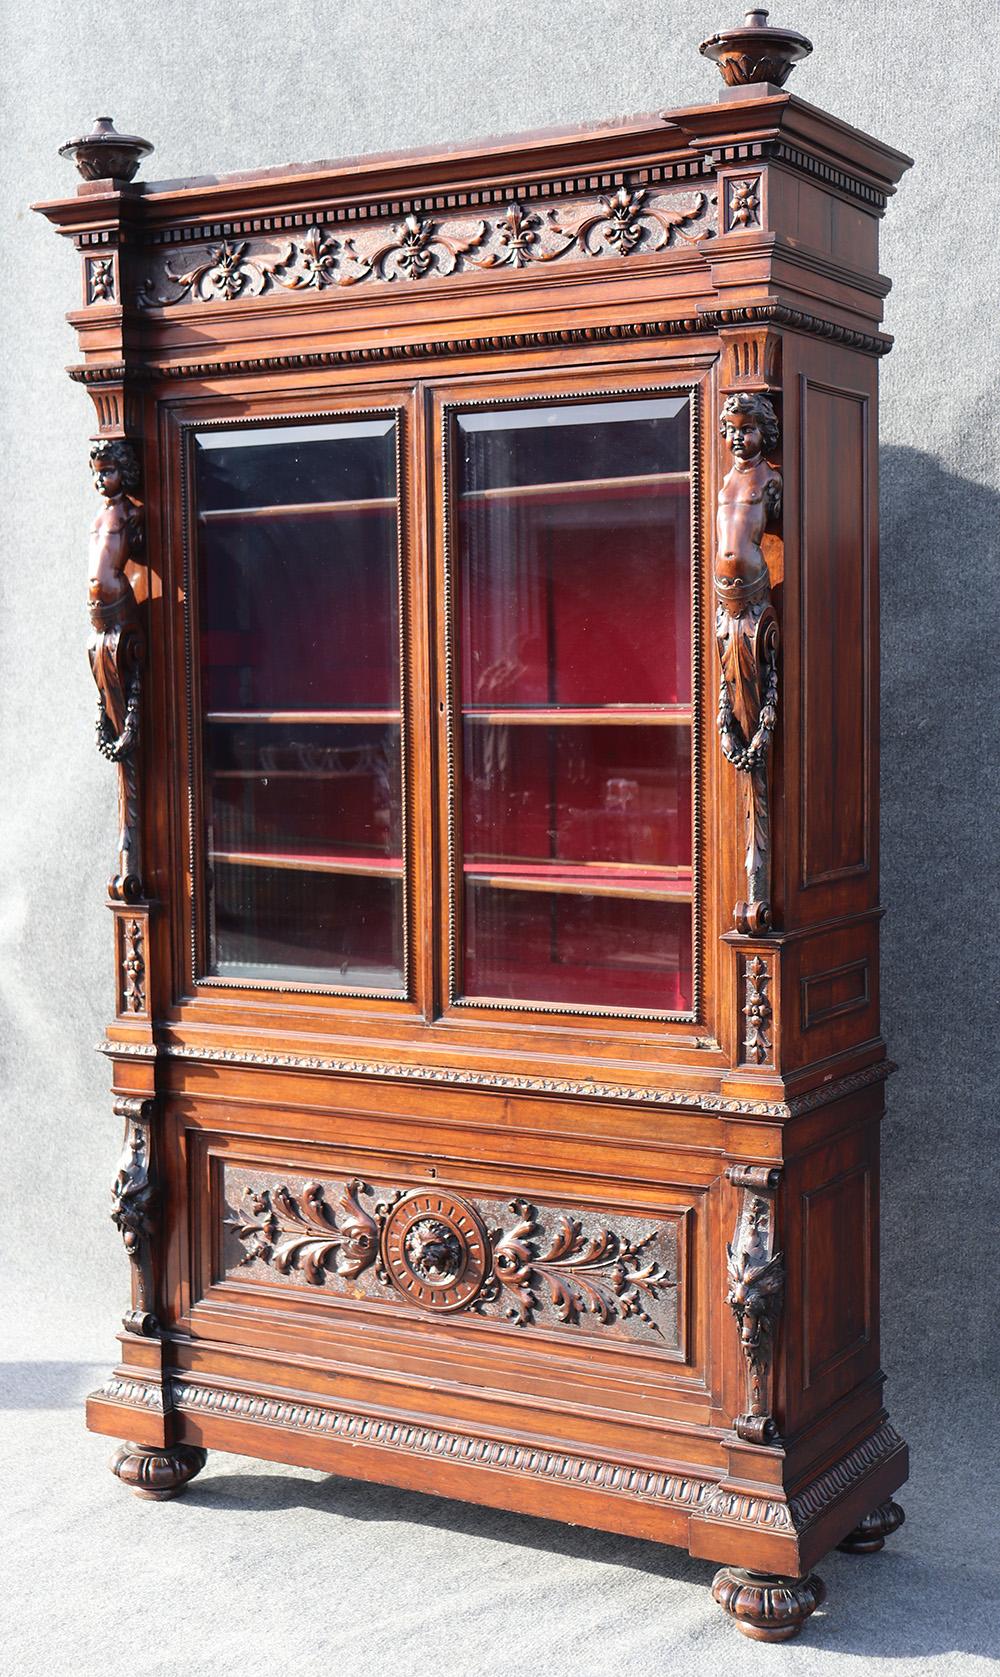 This is a wonderful carved walnut bookcase from Italy. Look at the incredible carving and quality of this bookcase. Notice the mythical creatures and cherubs and lions that adorn this spectacular bookcase! This is a 2-piece bookcase and is